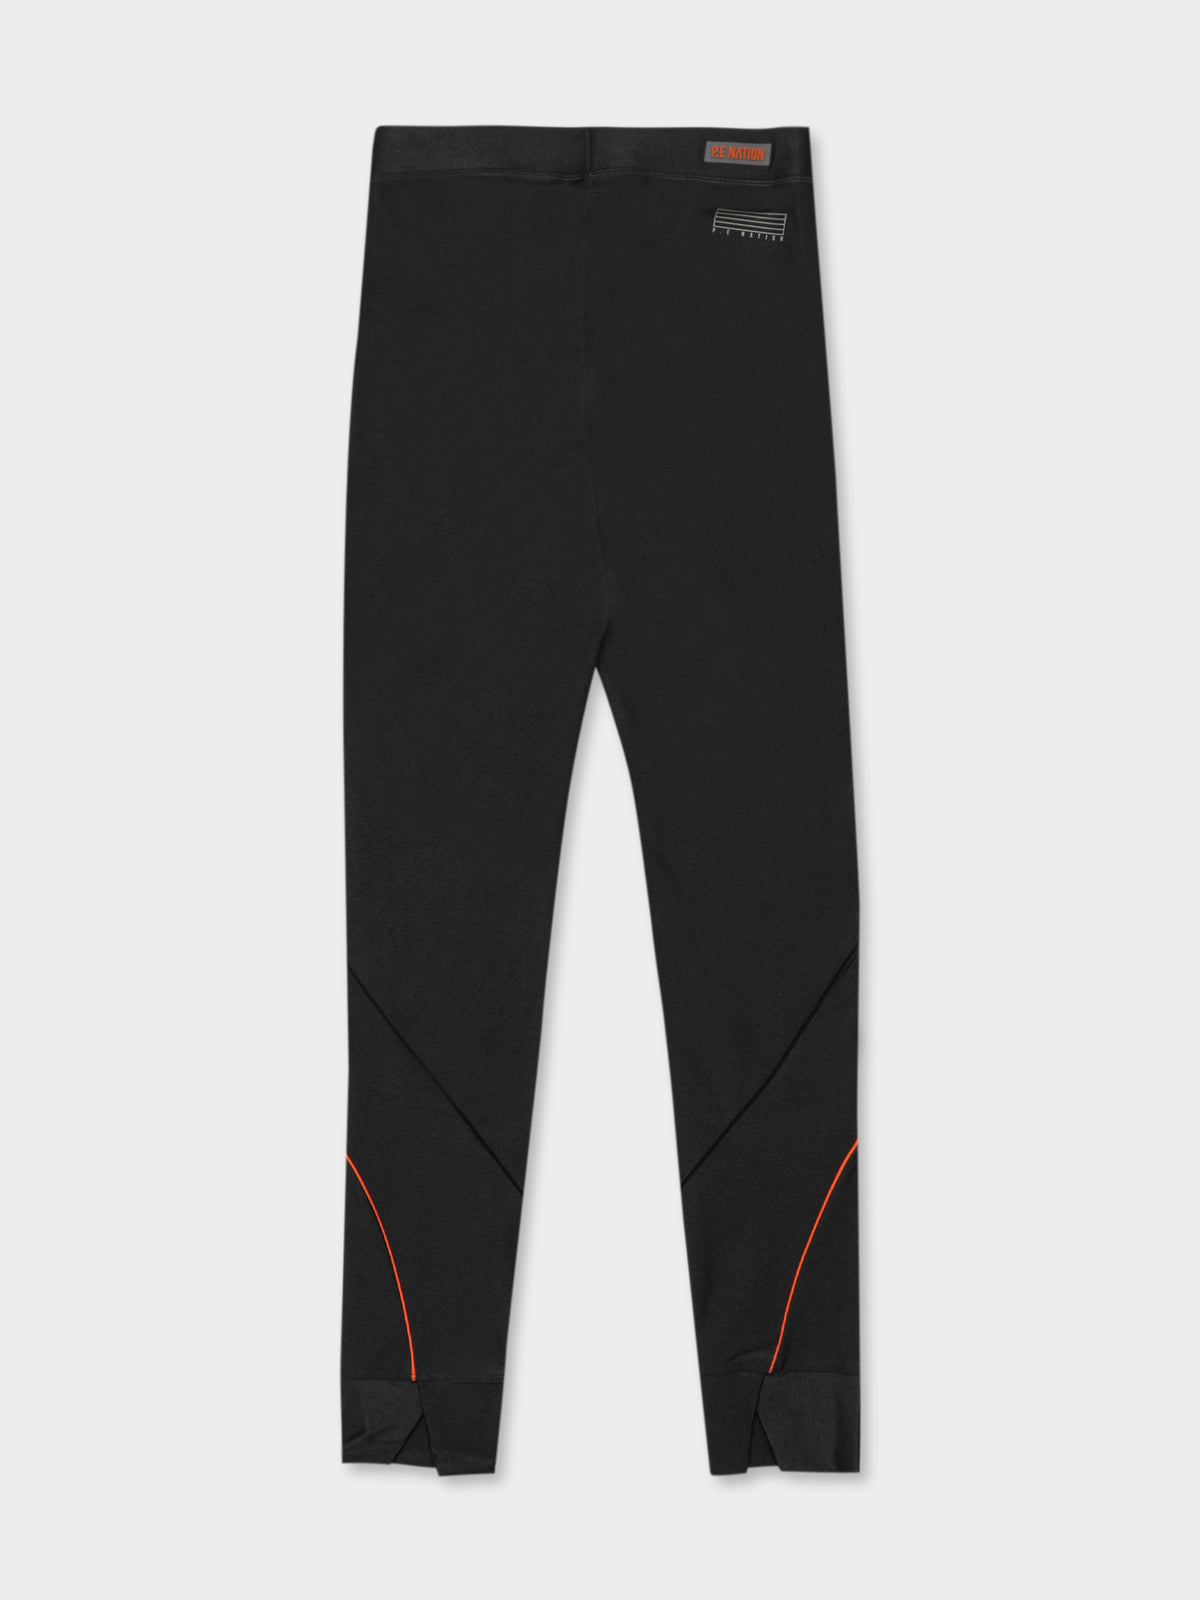 Game Day Leggings in Charcoal